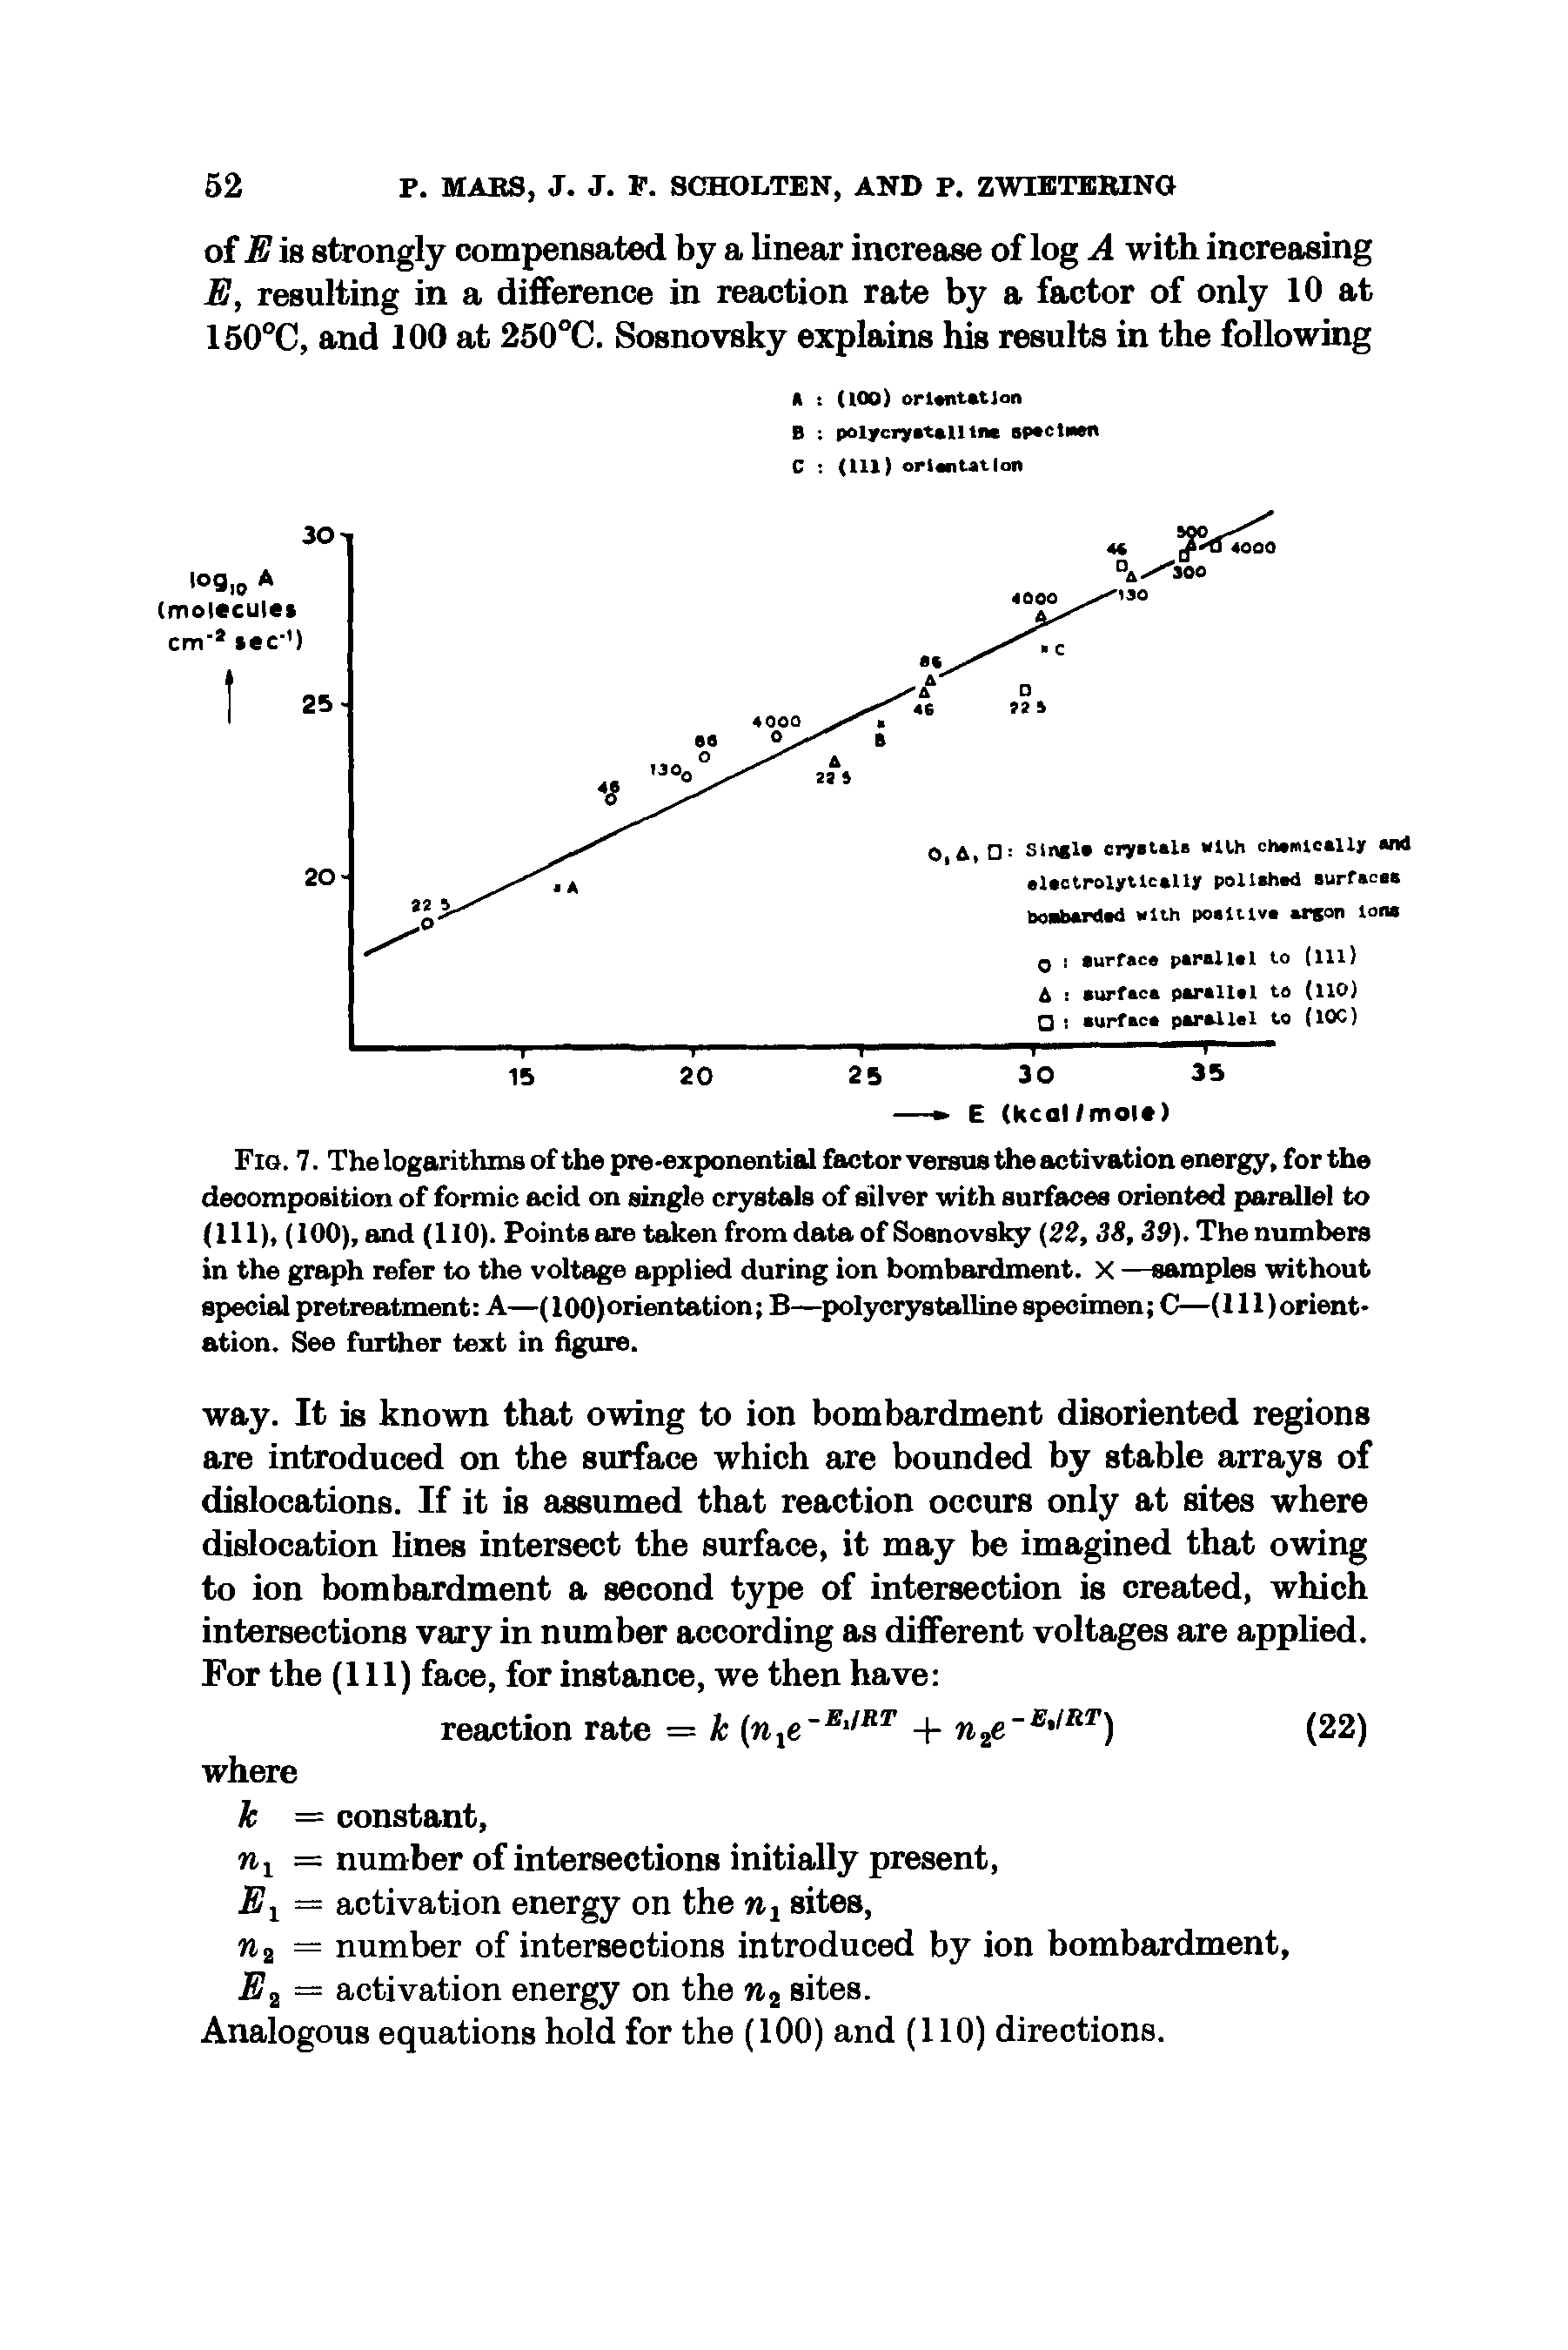 Fig. 7. The logarithms of the pre-exponential factor versus the activation energy, for the decomposition of formic acid on single crystals of silver with surfaces oriented parallel to (111), (100), and (110). Points are taken from data of Sosnovsky (22, 38, 39). The numbers in the graph refer to the voltage applied during ion bombardment. X —samples without special pretreatment A—(100)orientation B—polycrystalline specimen C—(11 orientation. See further text in figure.